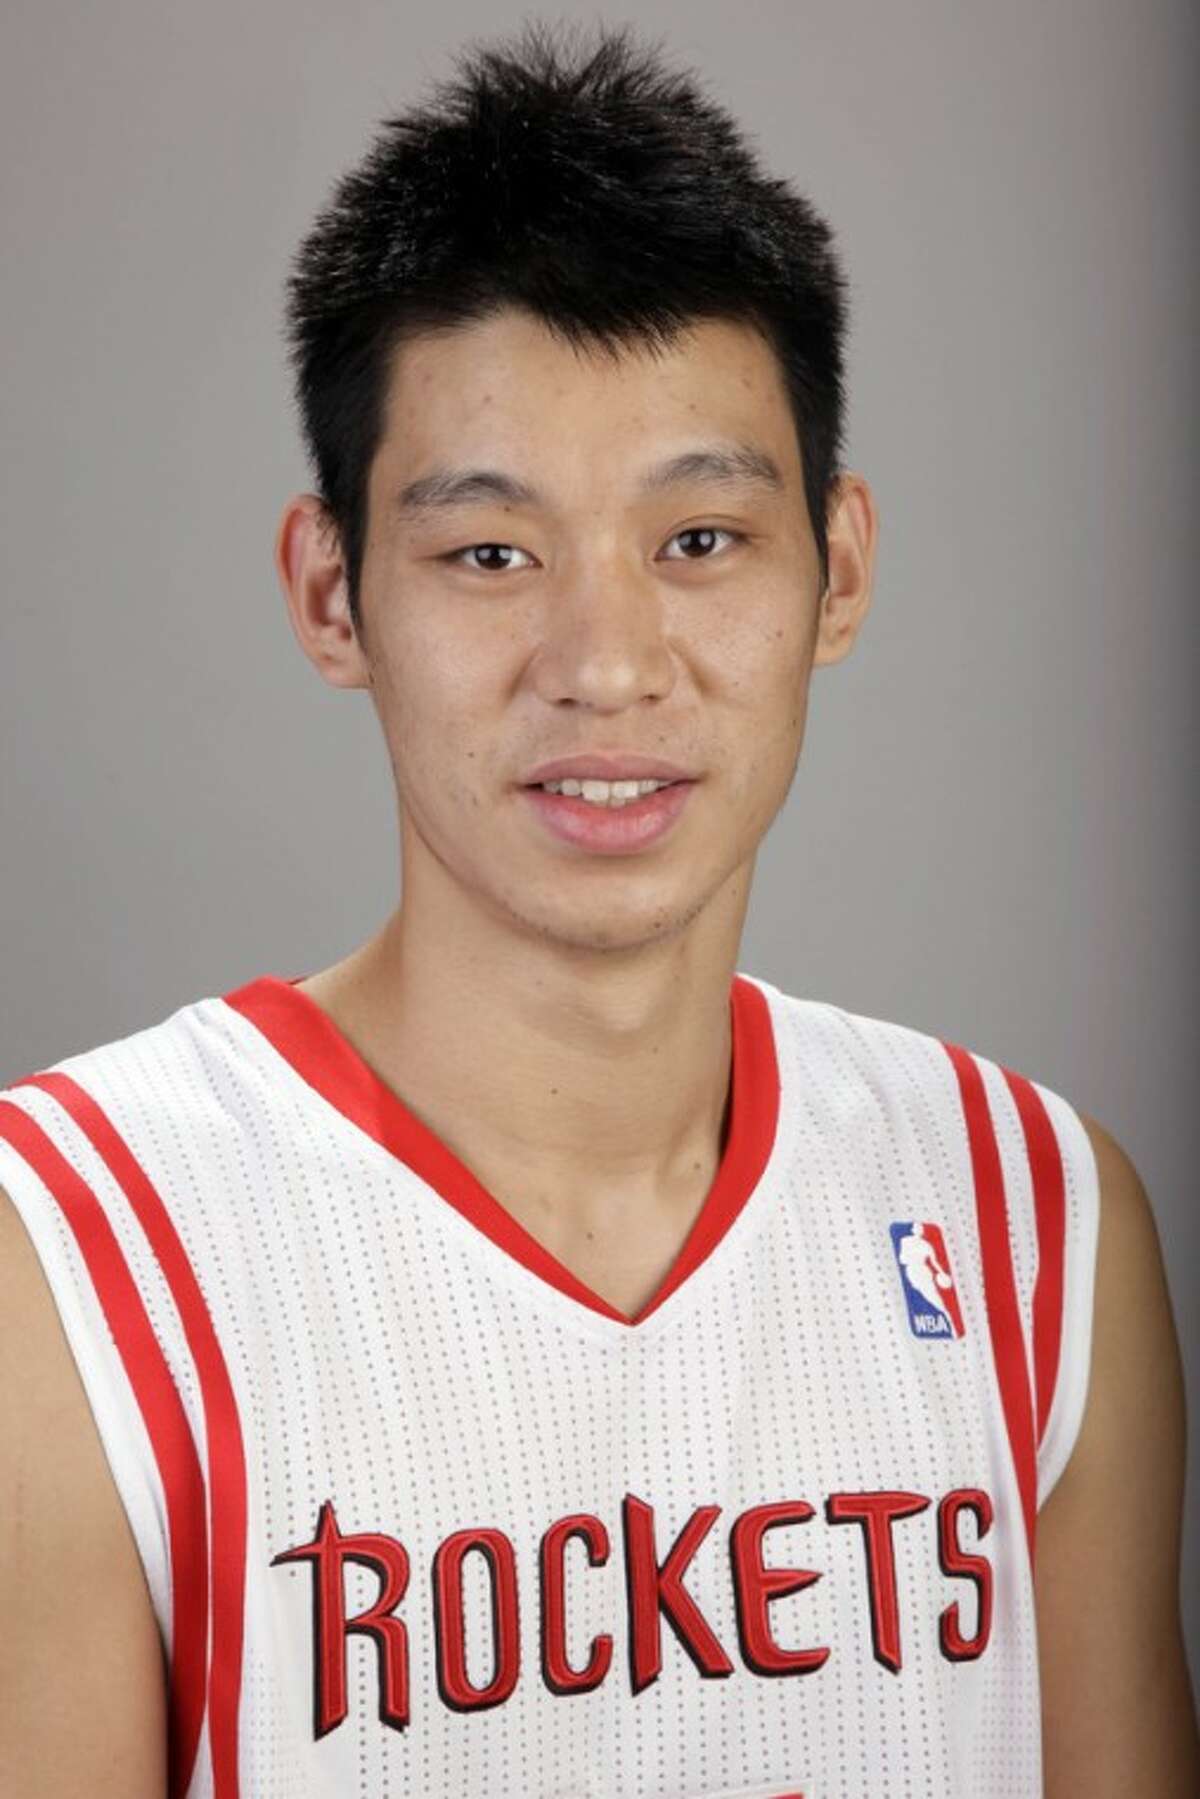 FILE - In this Dec. 15, 2011 file photo, Houston Rockets' Jeremy Lin is shown during the team's NBA basketball media day in Houston. Linsanity could be put to rest in New York when the clock strikes midnight. That's the deadline the New York Knicks face to match the daunting offer the Rockets have made to Lin, the Harvard point guard who dazzled all of basketball for a brief stretch last season. (AP Photo/David J. Phillip, File)